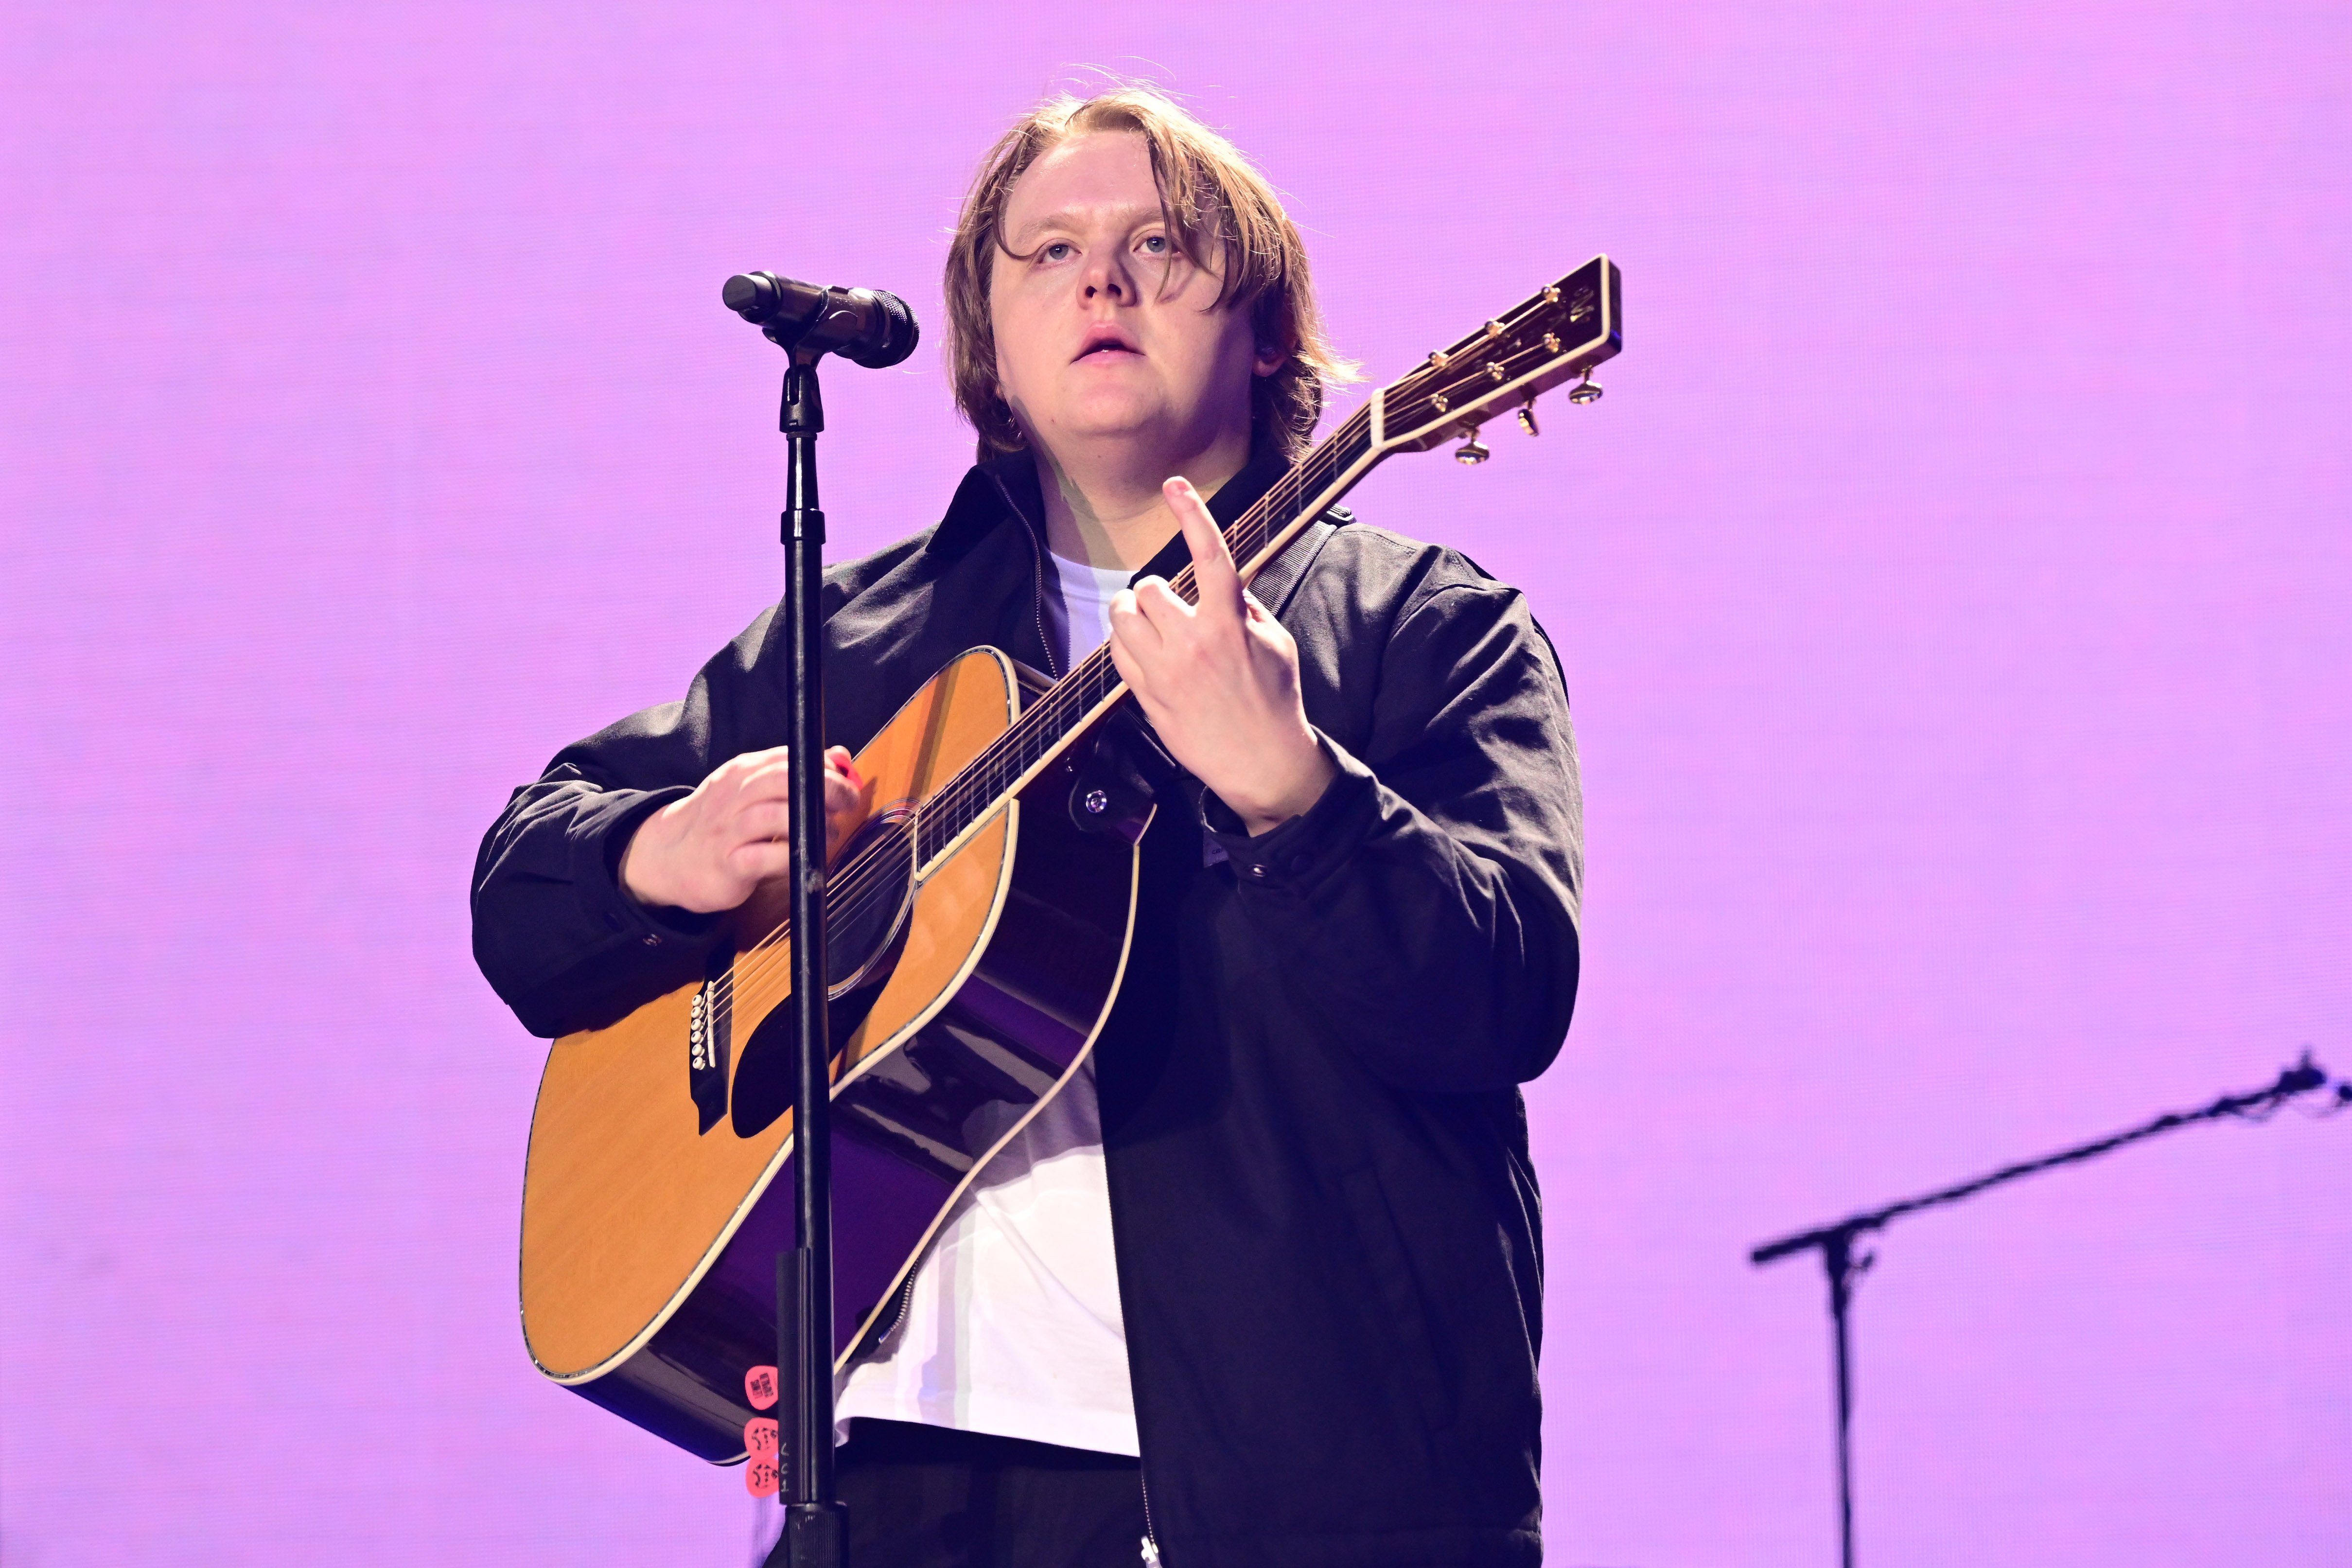 Lewis Capaldi reacts after being mistaken for Liz Truss in Netflix billboard promoting his documentary